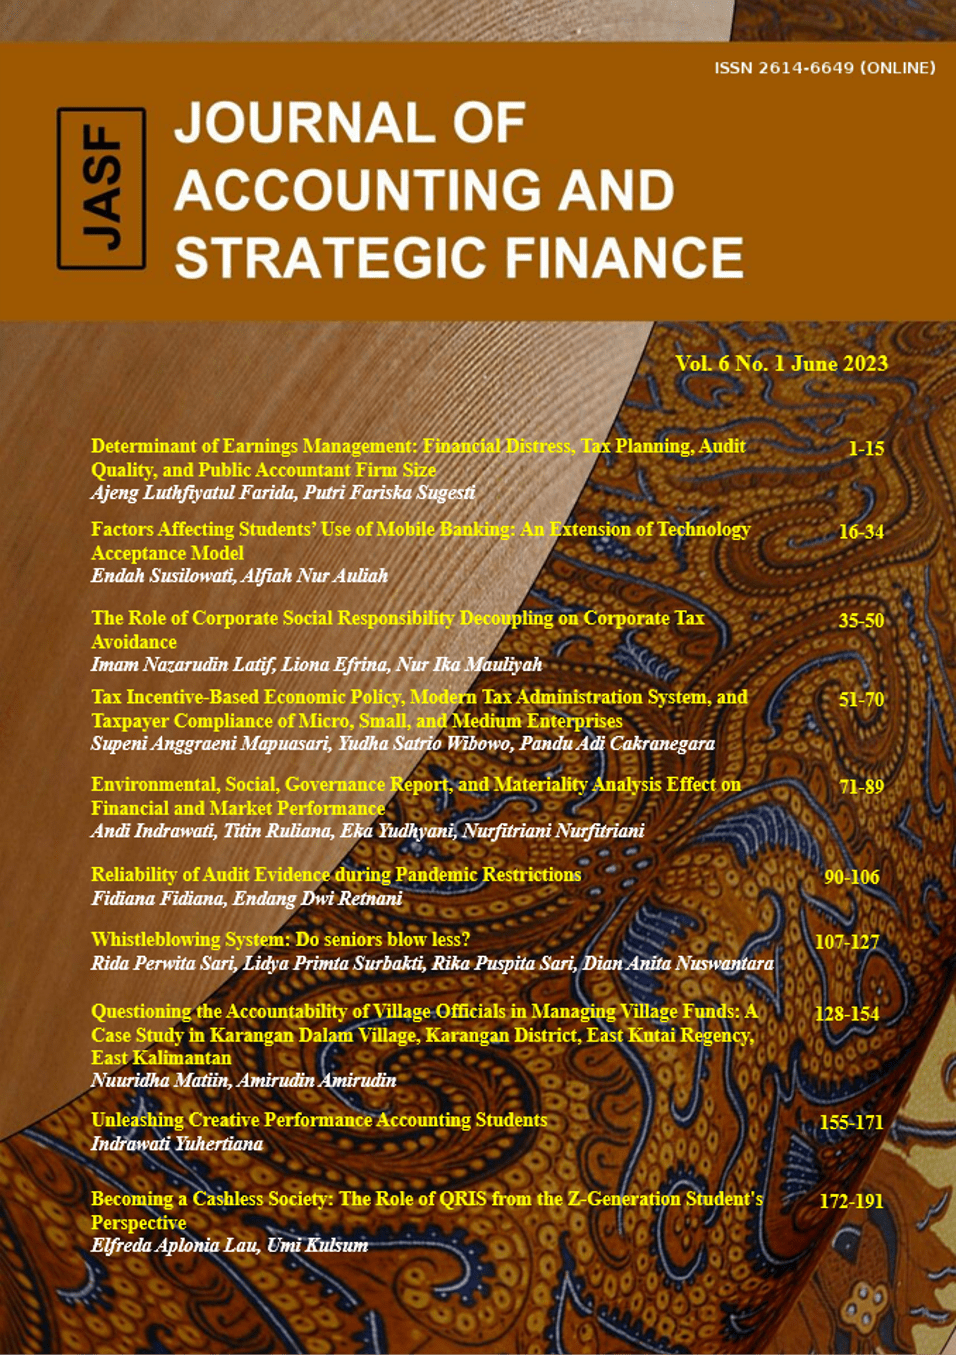 					View Vol. 6 No. 1 (2023): JASF (Journal of Accounting and Strategic Finance) - June 2023
				